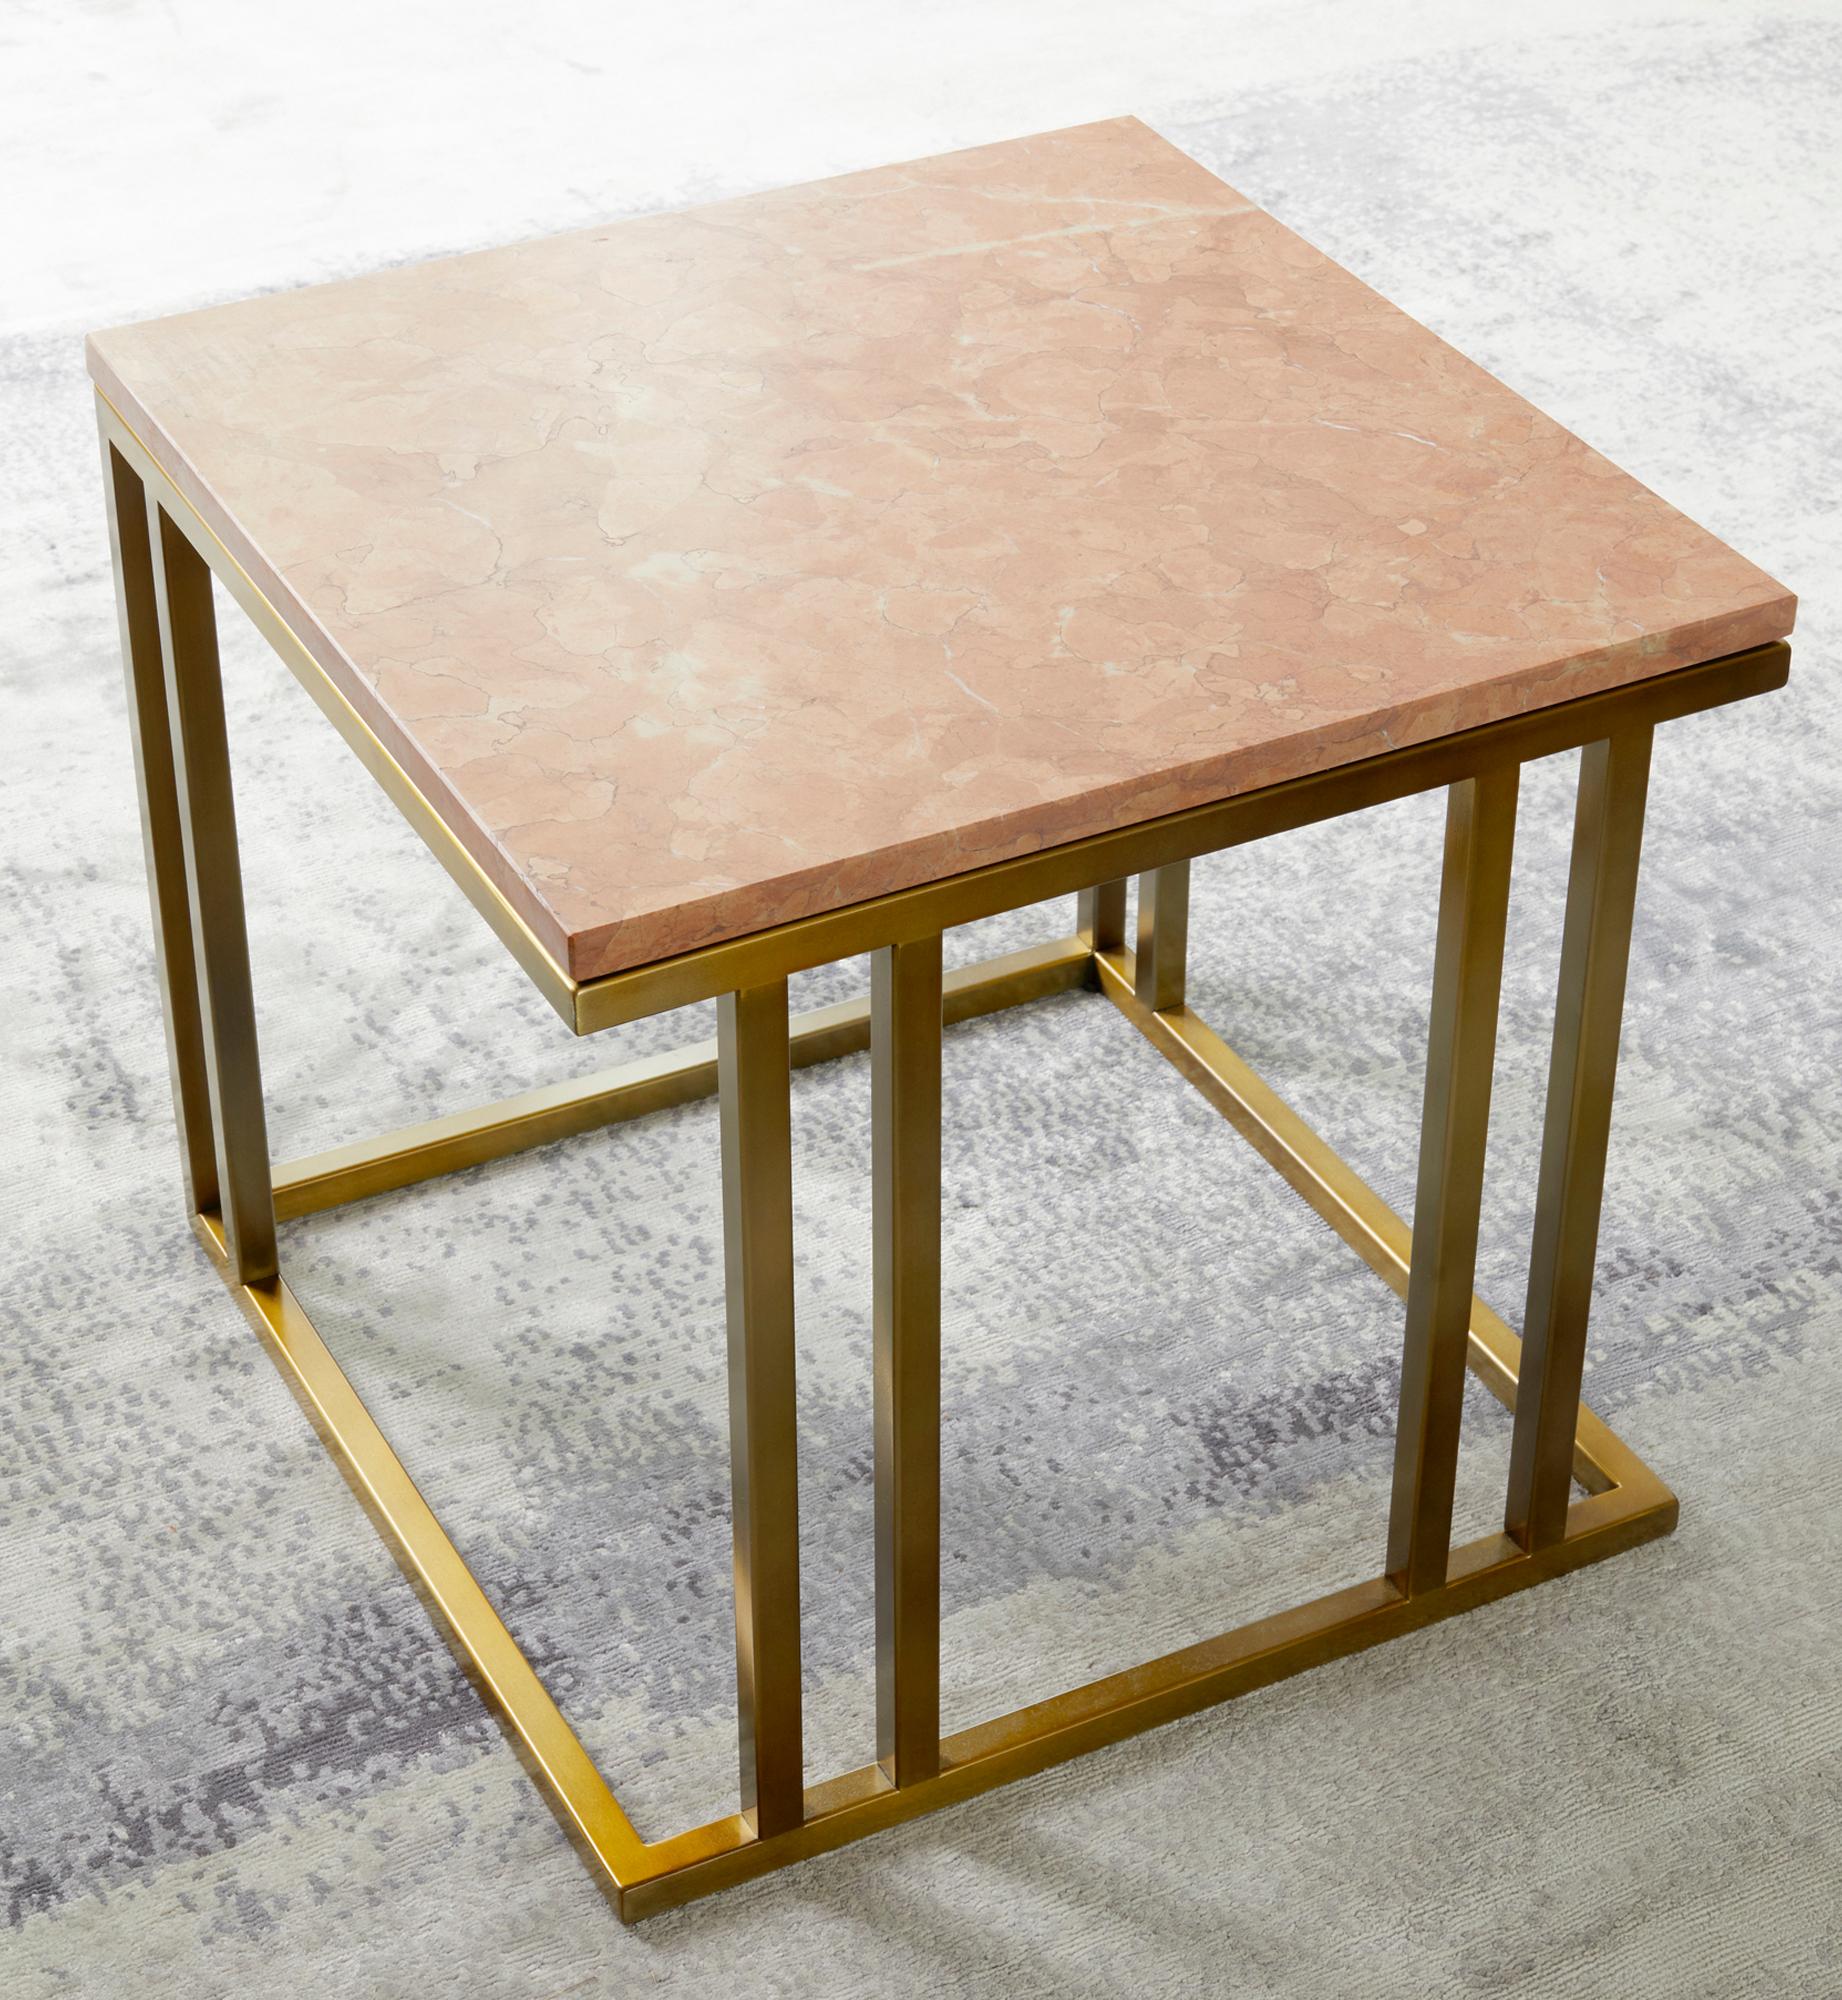 Whether it’s a perch for your Martini, a safe haven for your bedtime chamomile or a refuge for your favourite Jane Austin, the Elio side table is on call. With its fierce, symmetrical frame and textured table top, the Elio side table will complement